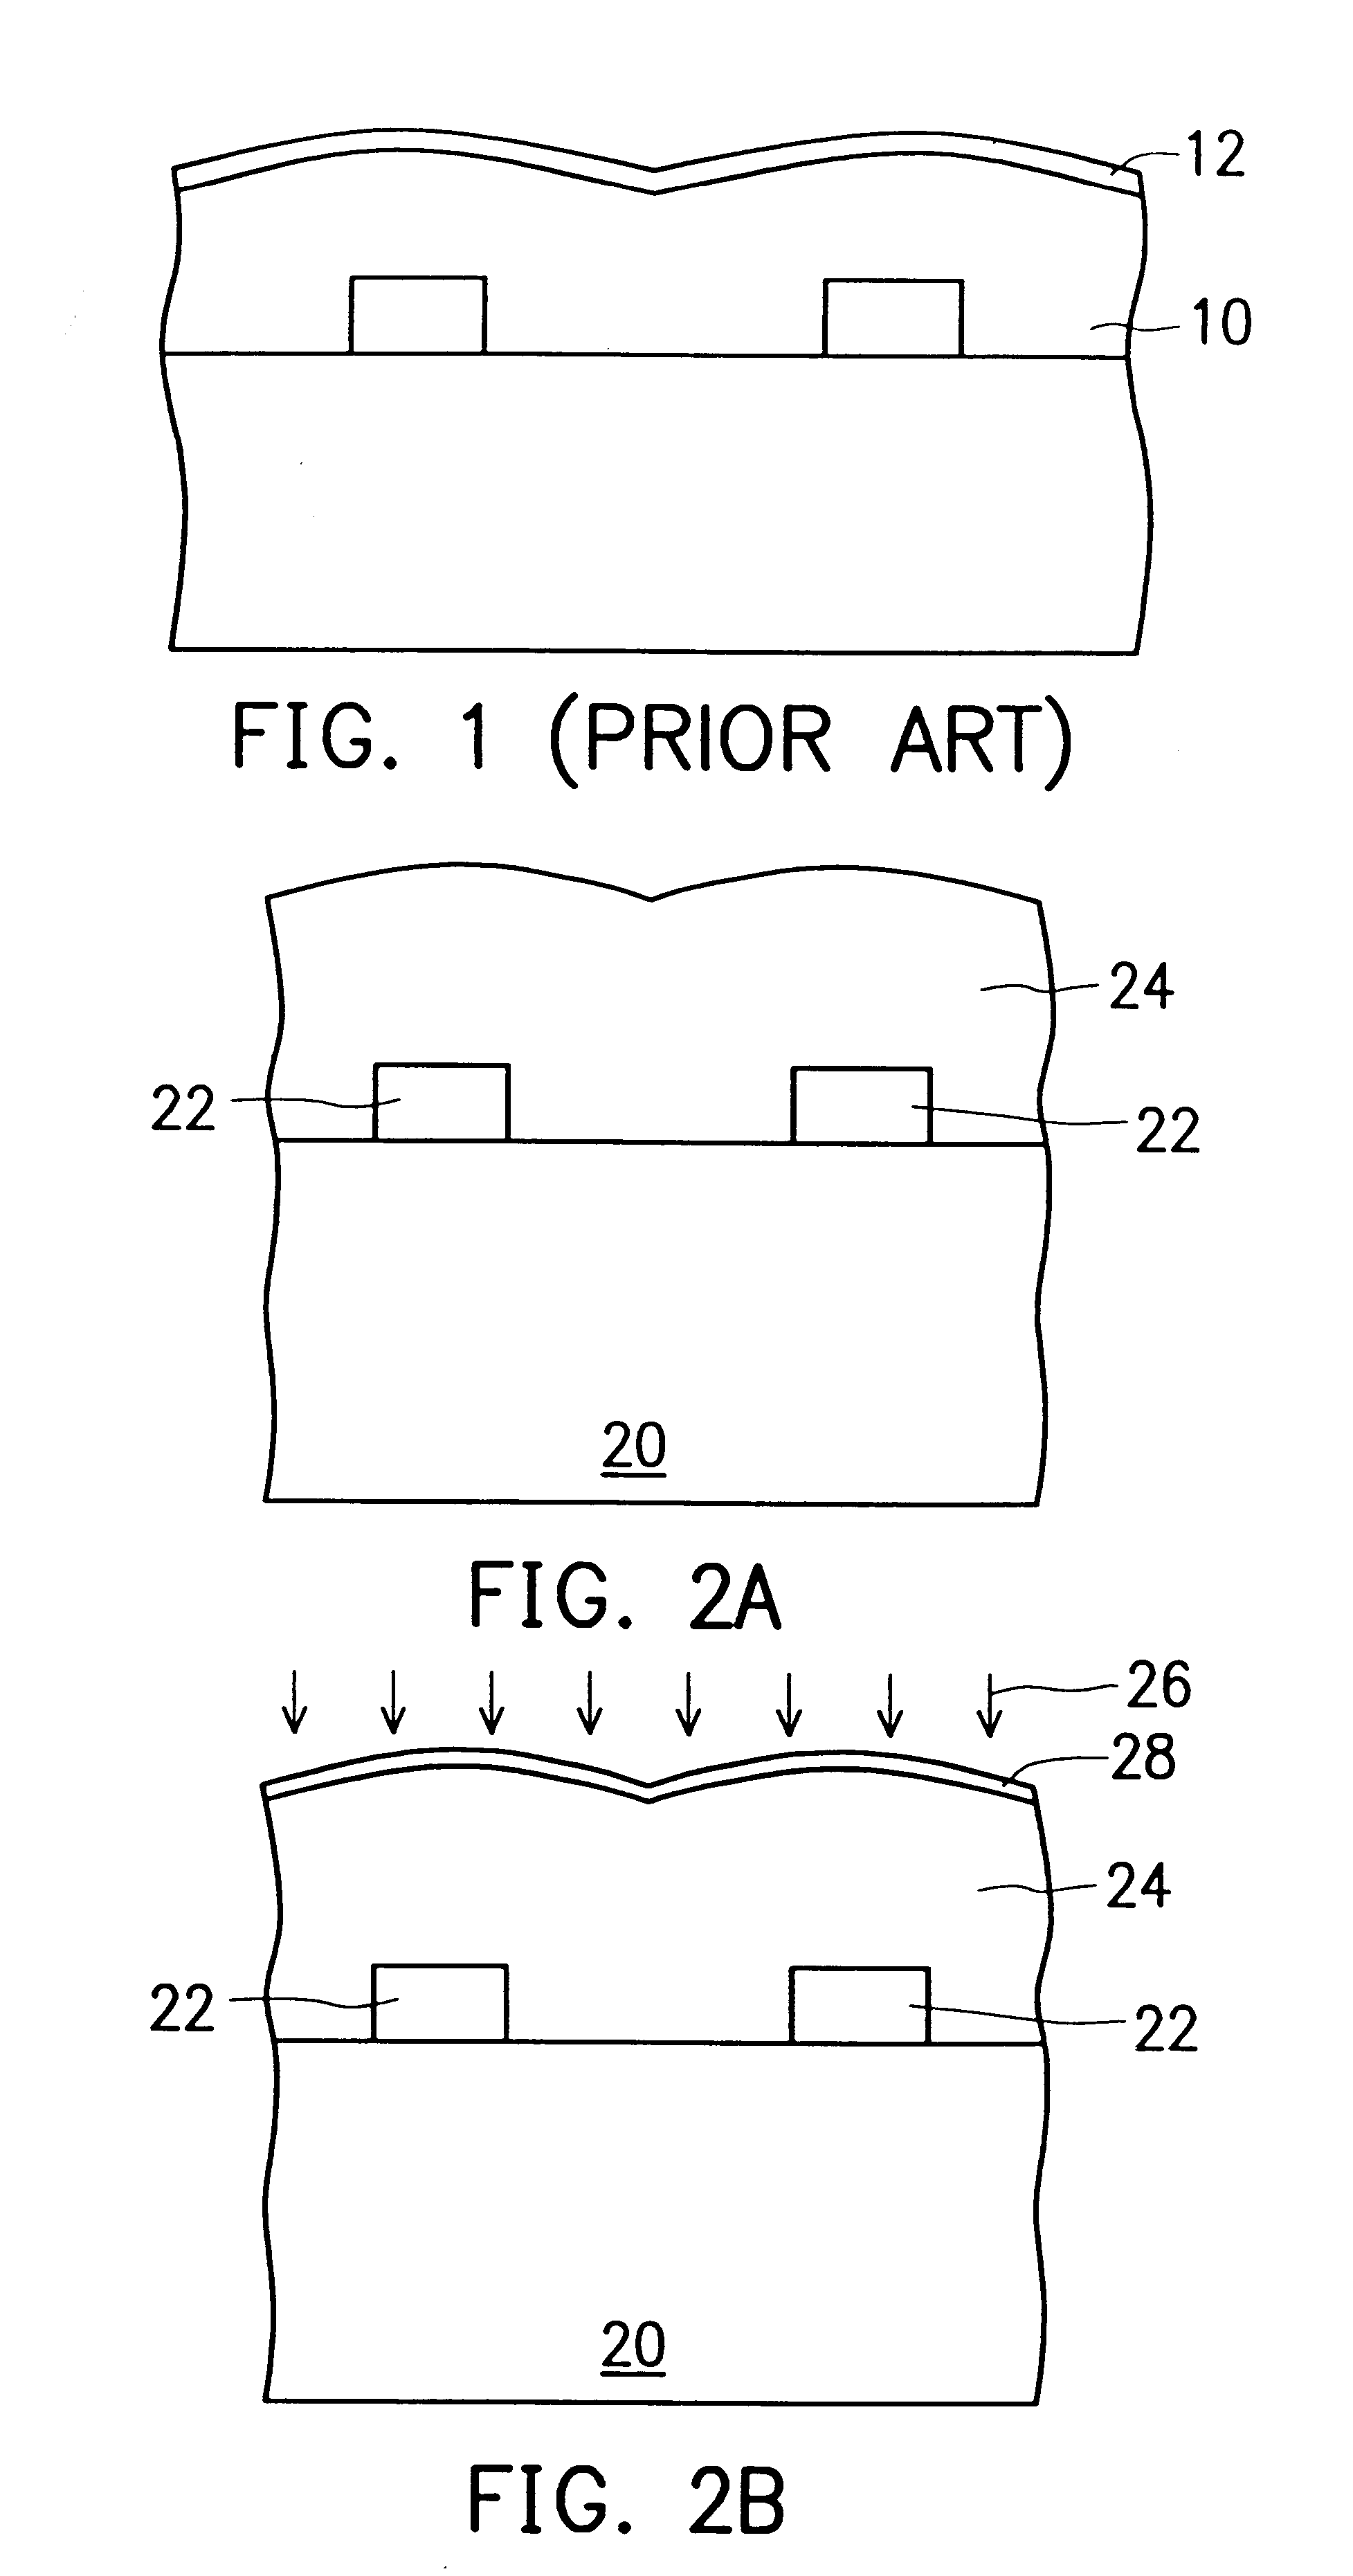 Method of forming fluorosilicate glass (FSG) layers with moisture-resistant capability